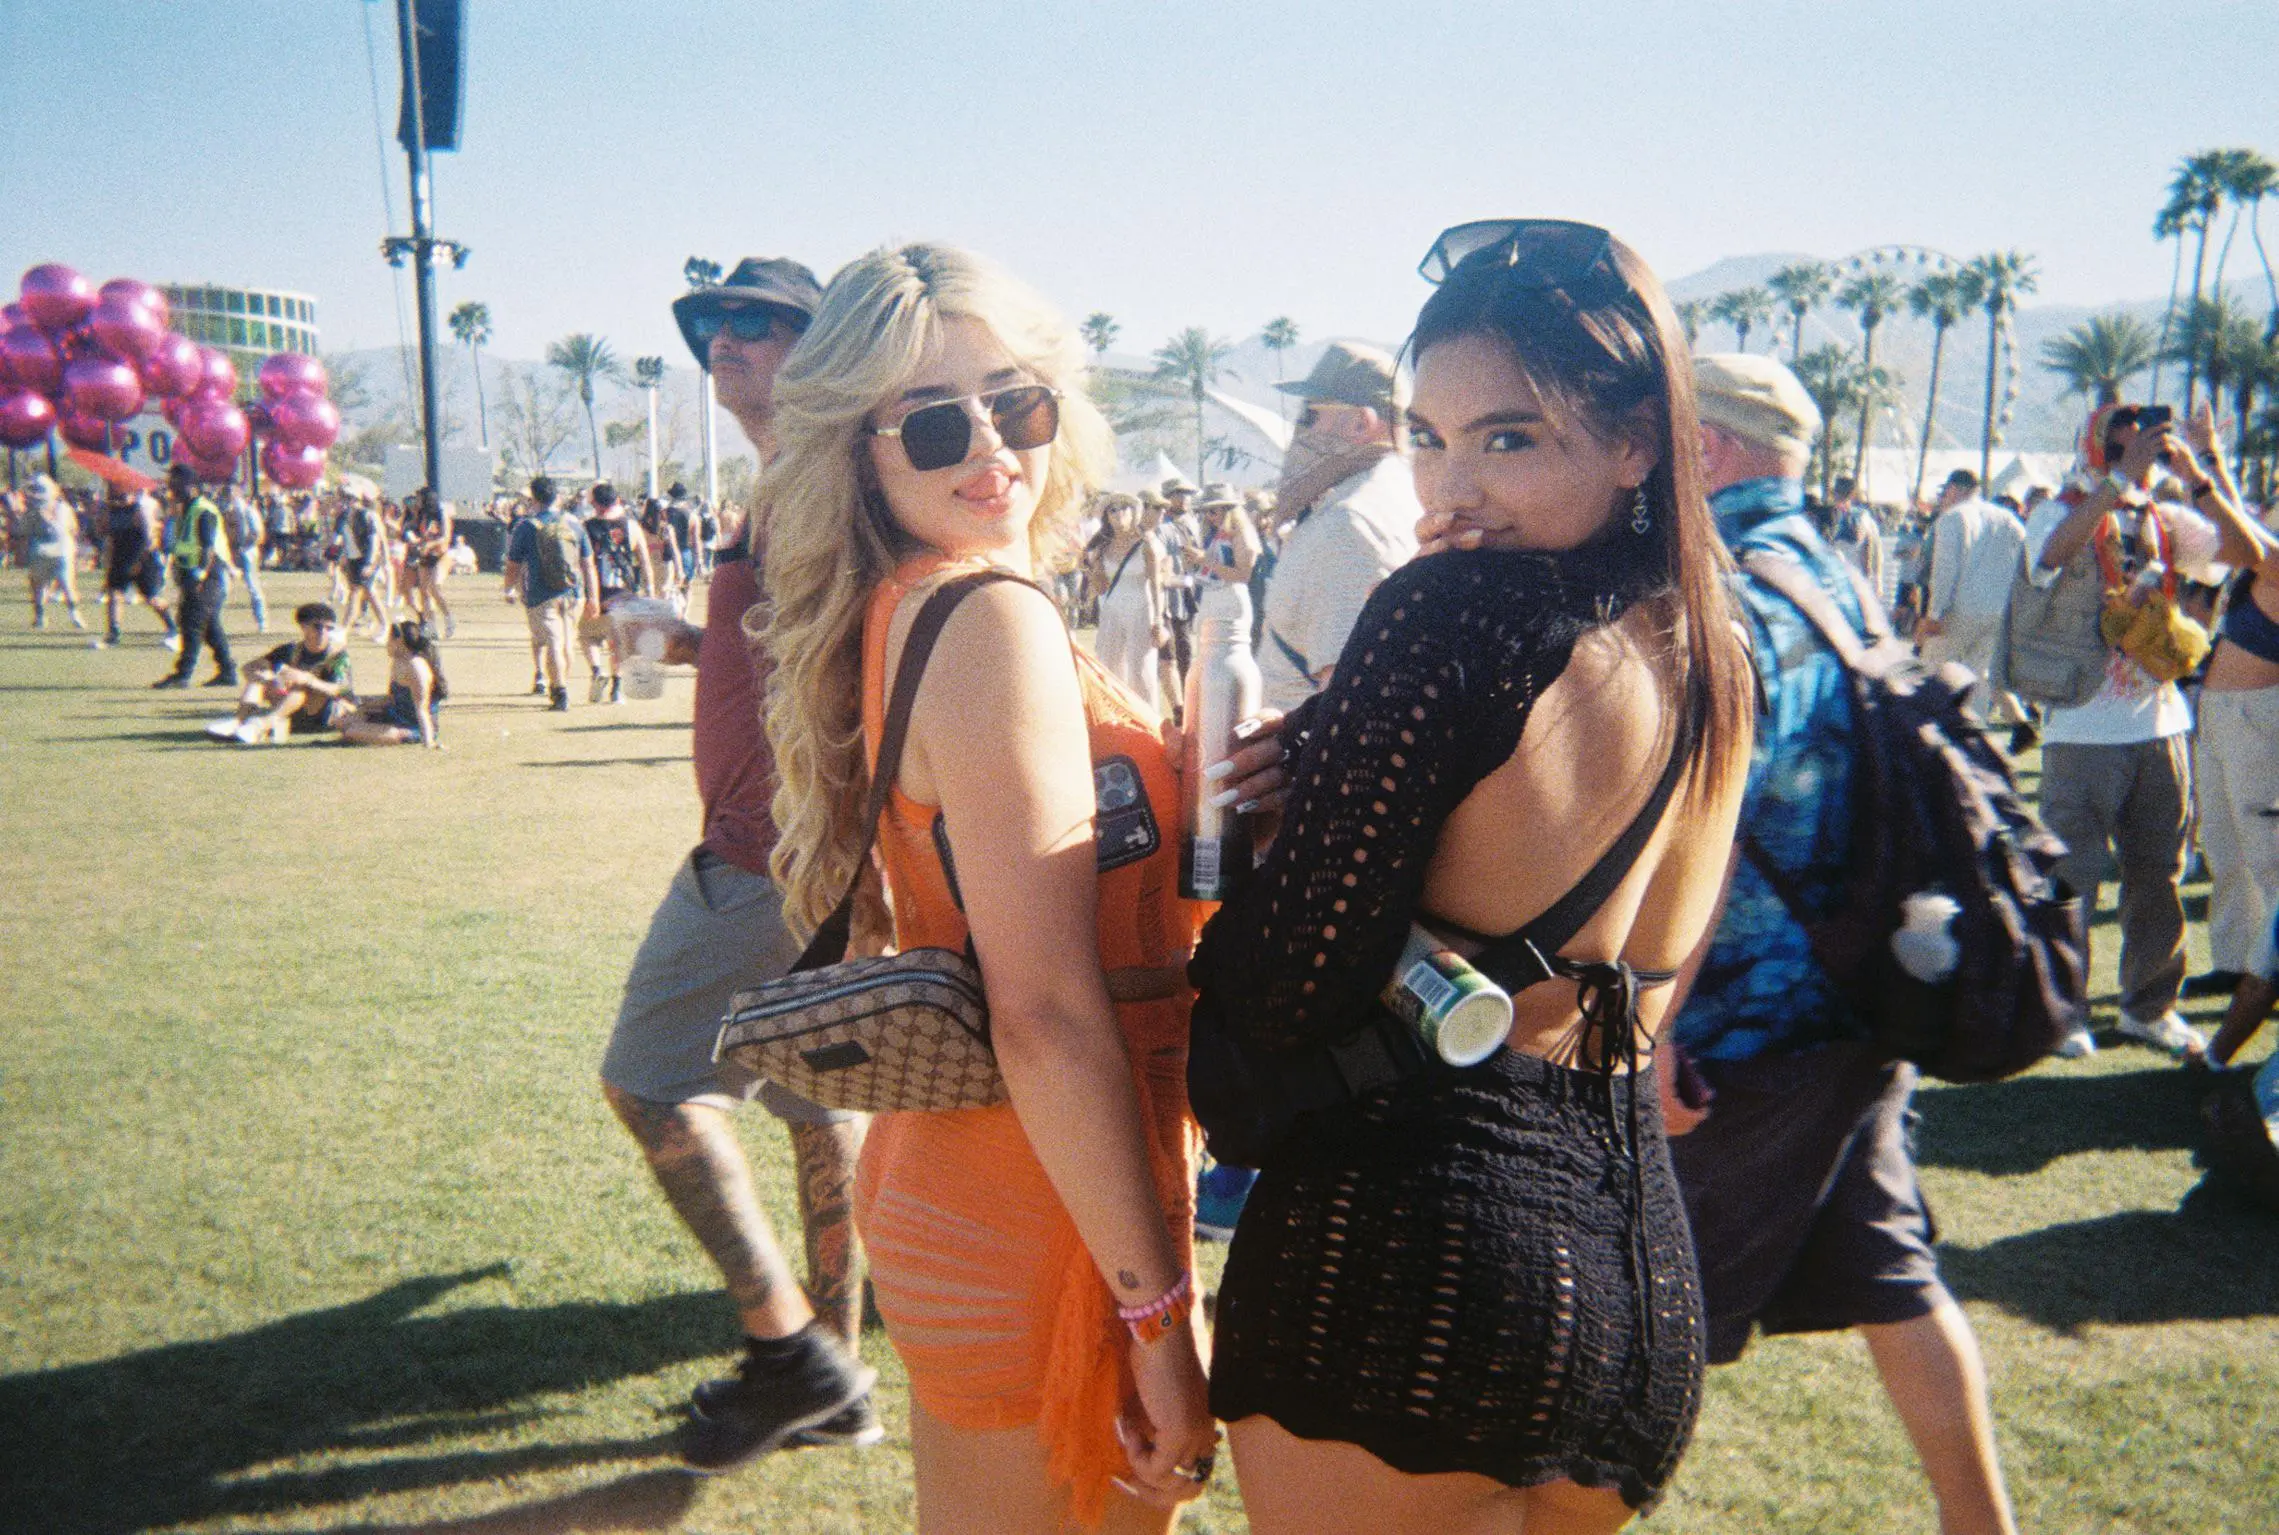 Coachella Travel Photography and Videography Gadgets